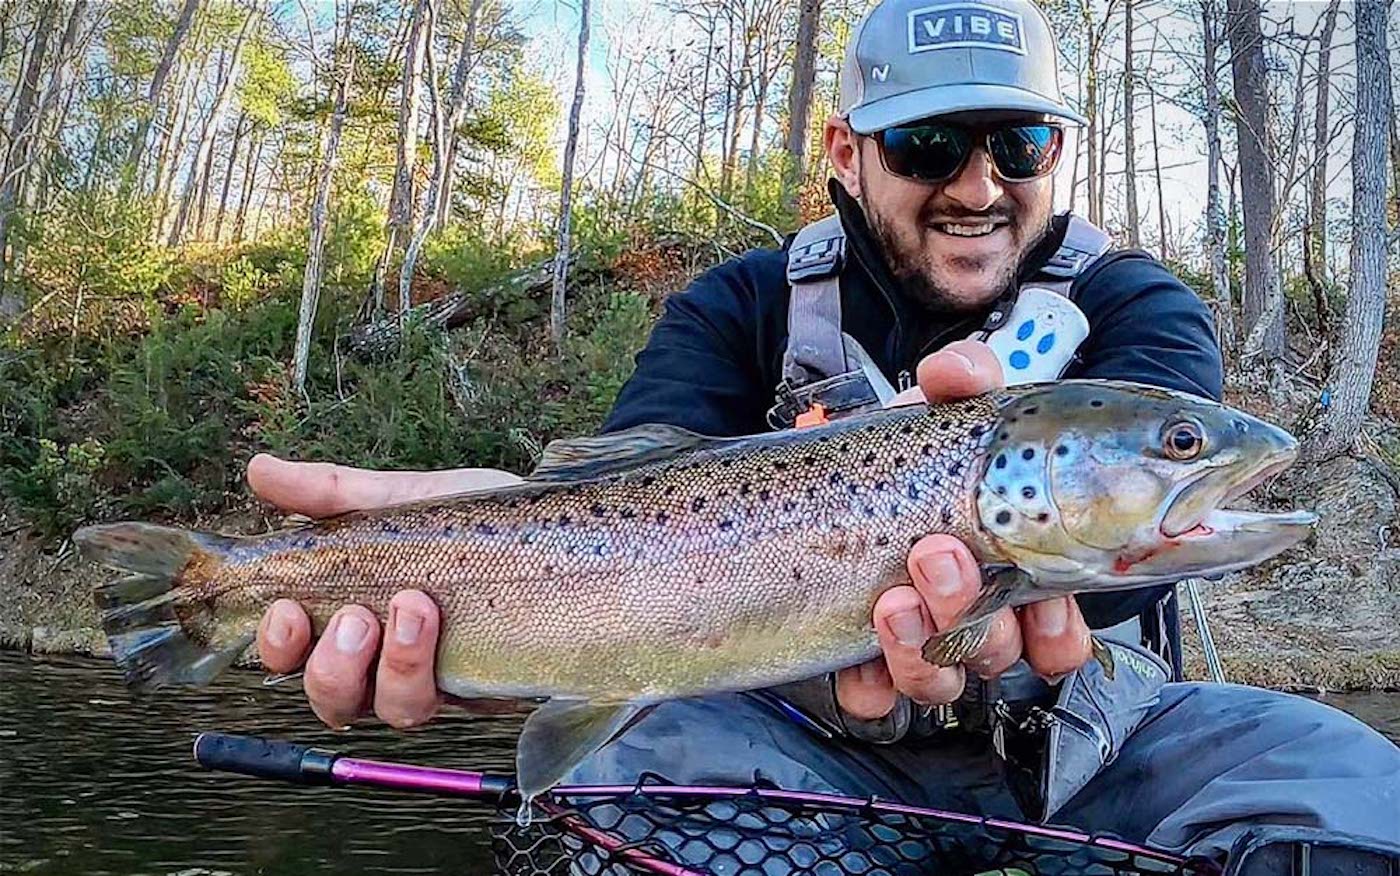 Top 5 Lures for Rainbow Trout! 